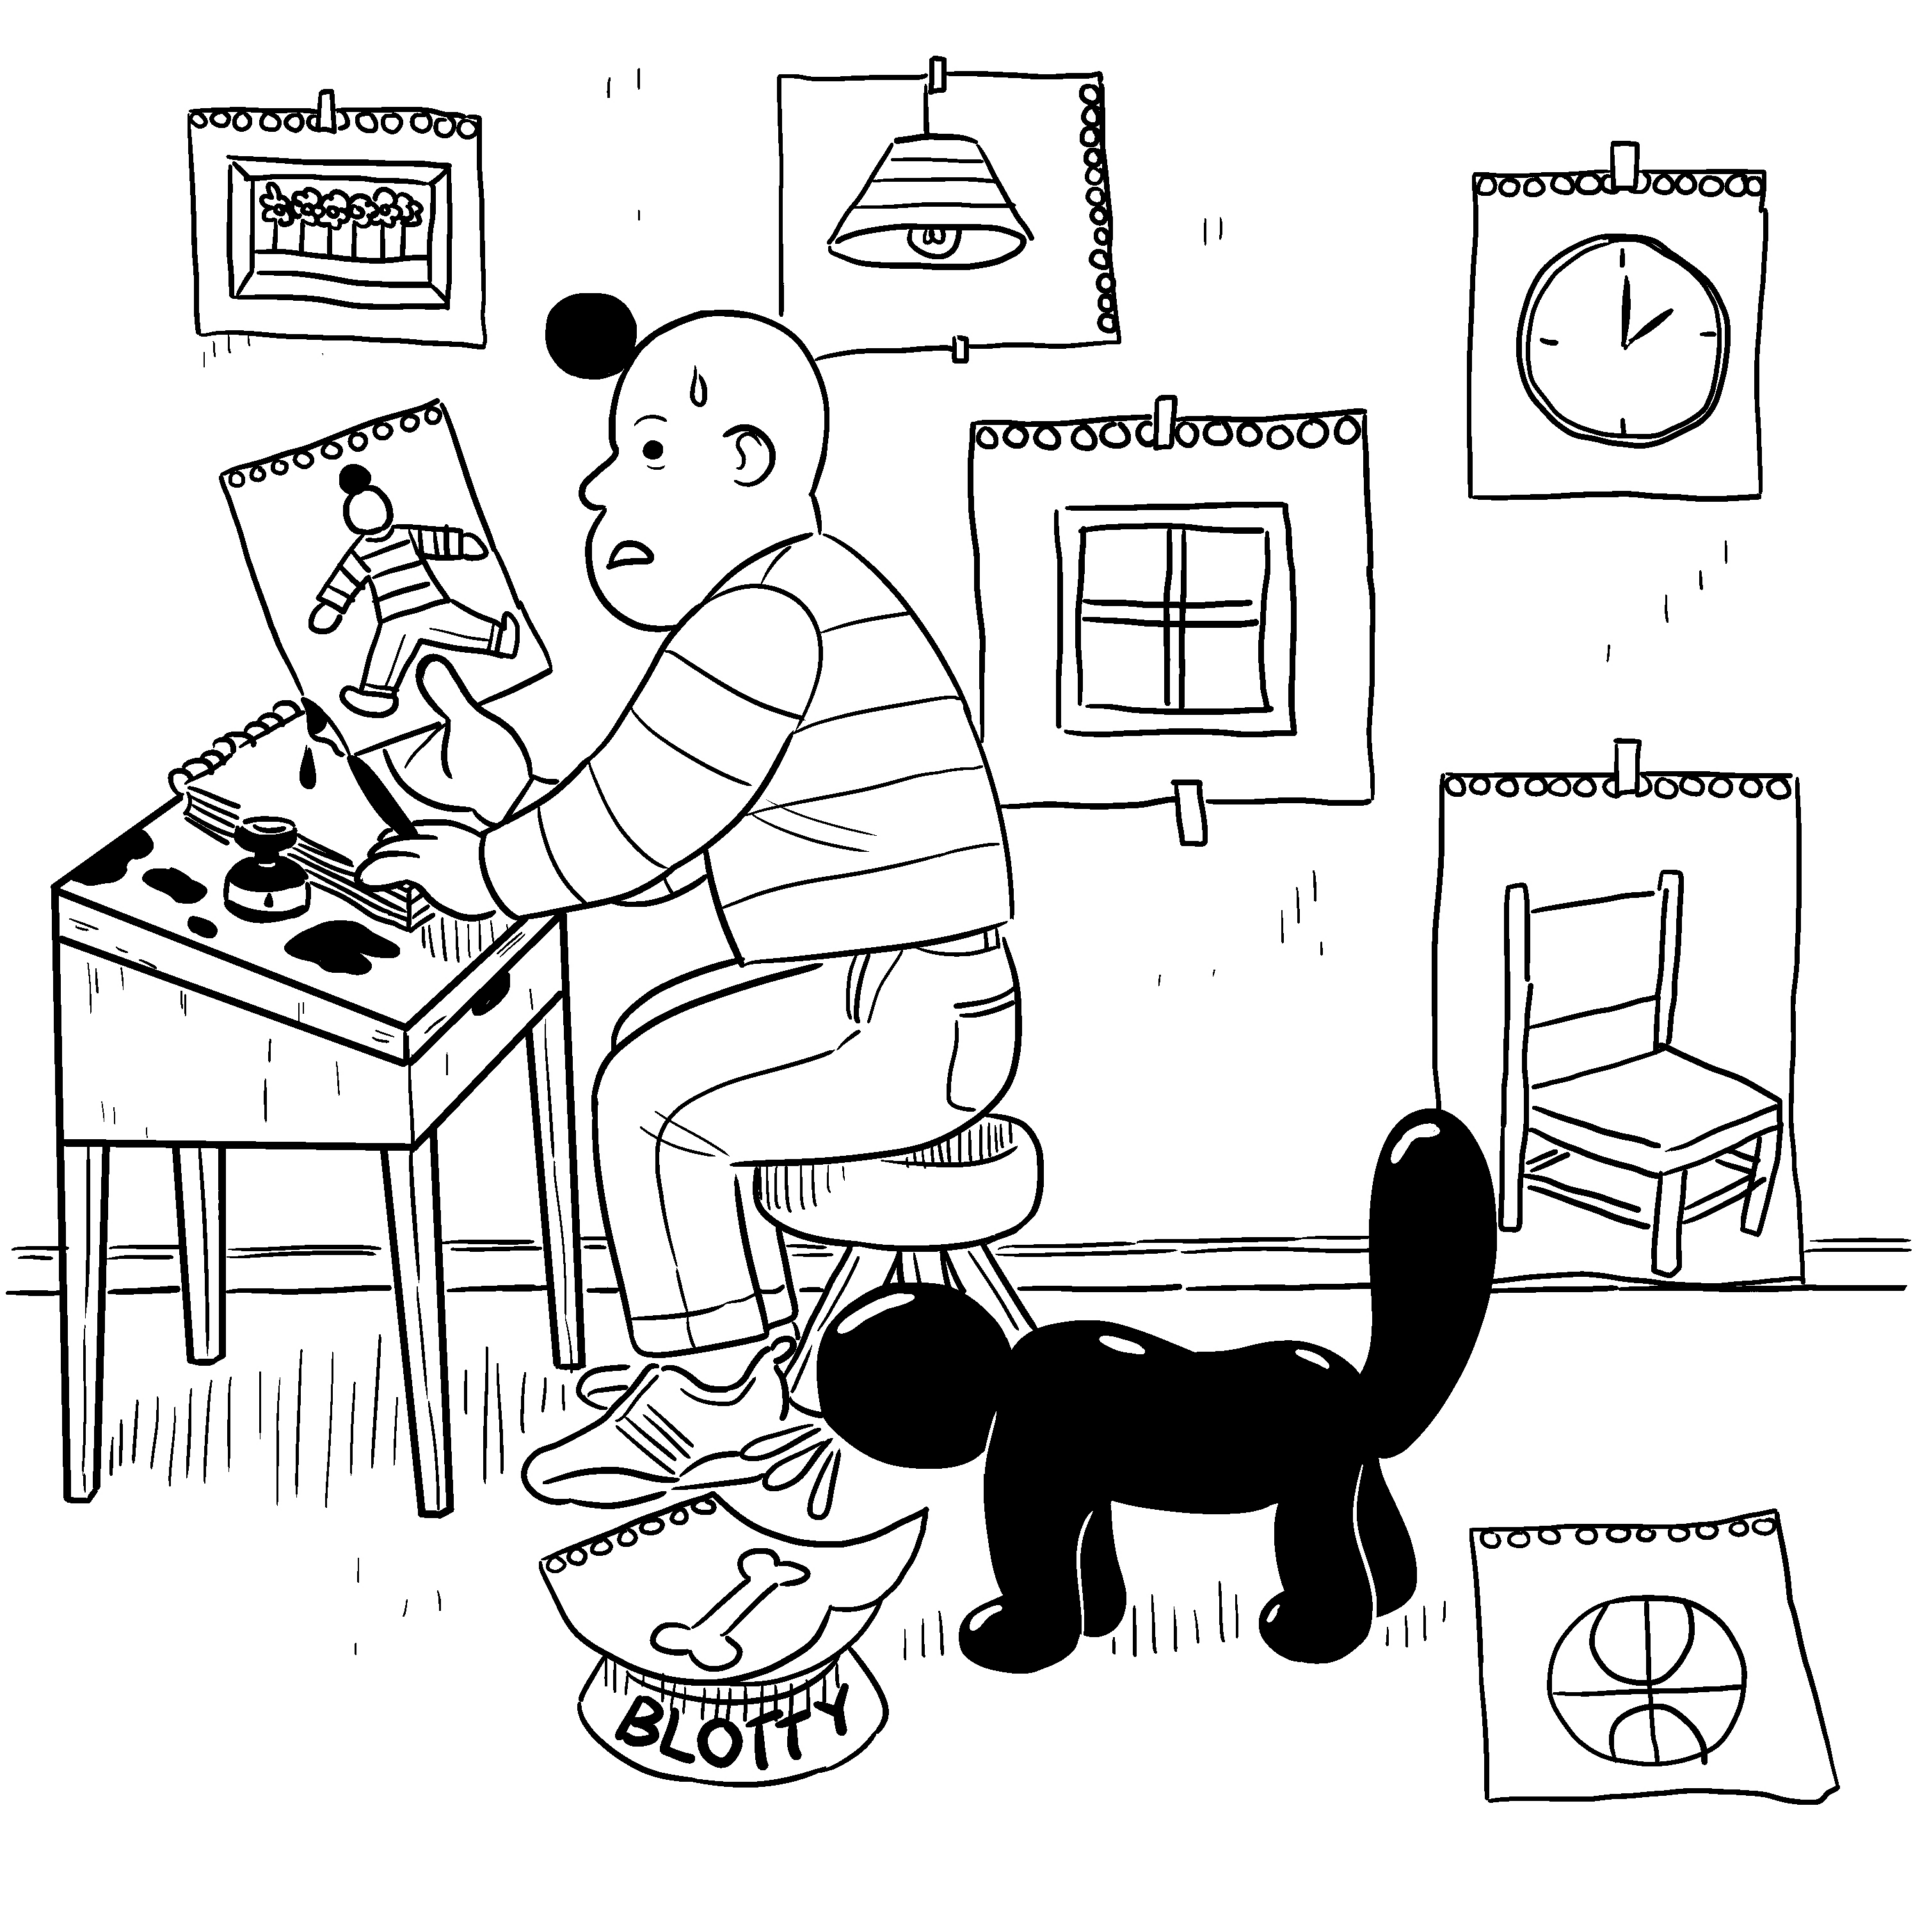 A man sits at his drawing table, looking nervously at his creation, as an ink blot dog barks in the background.